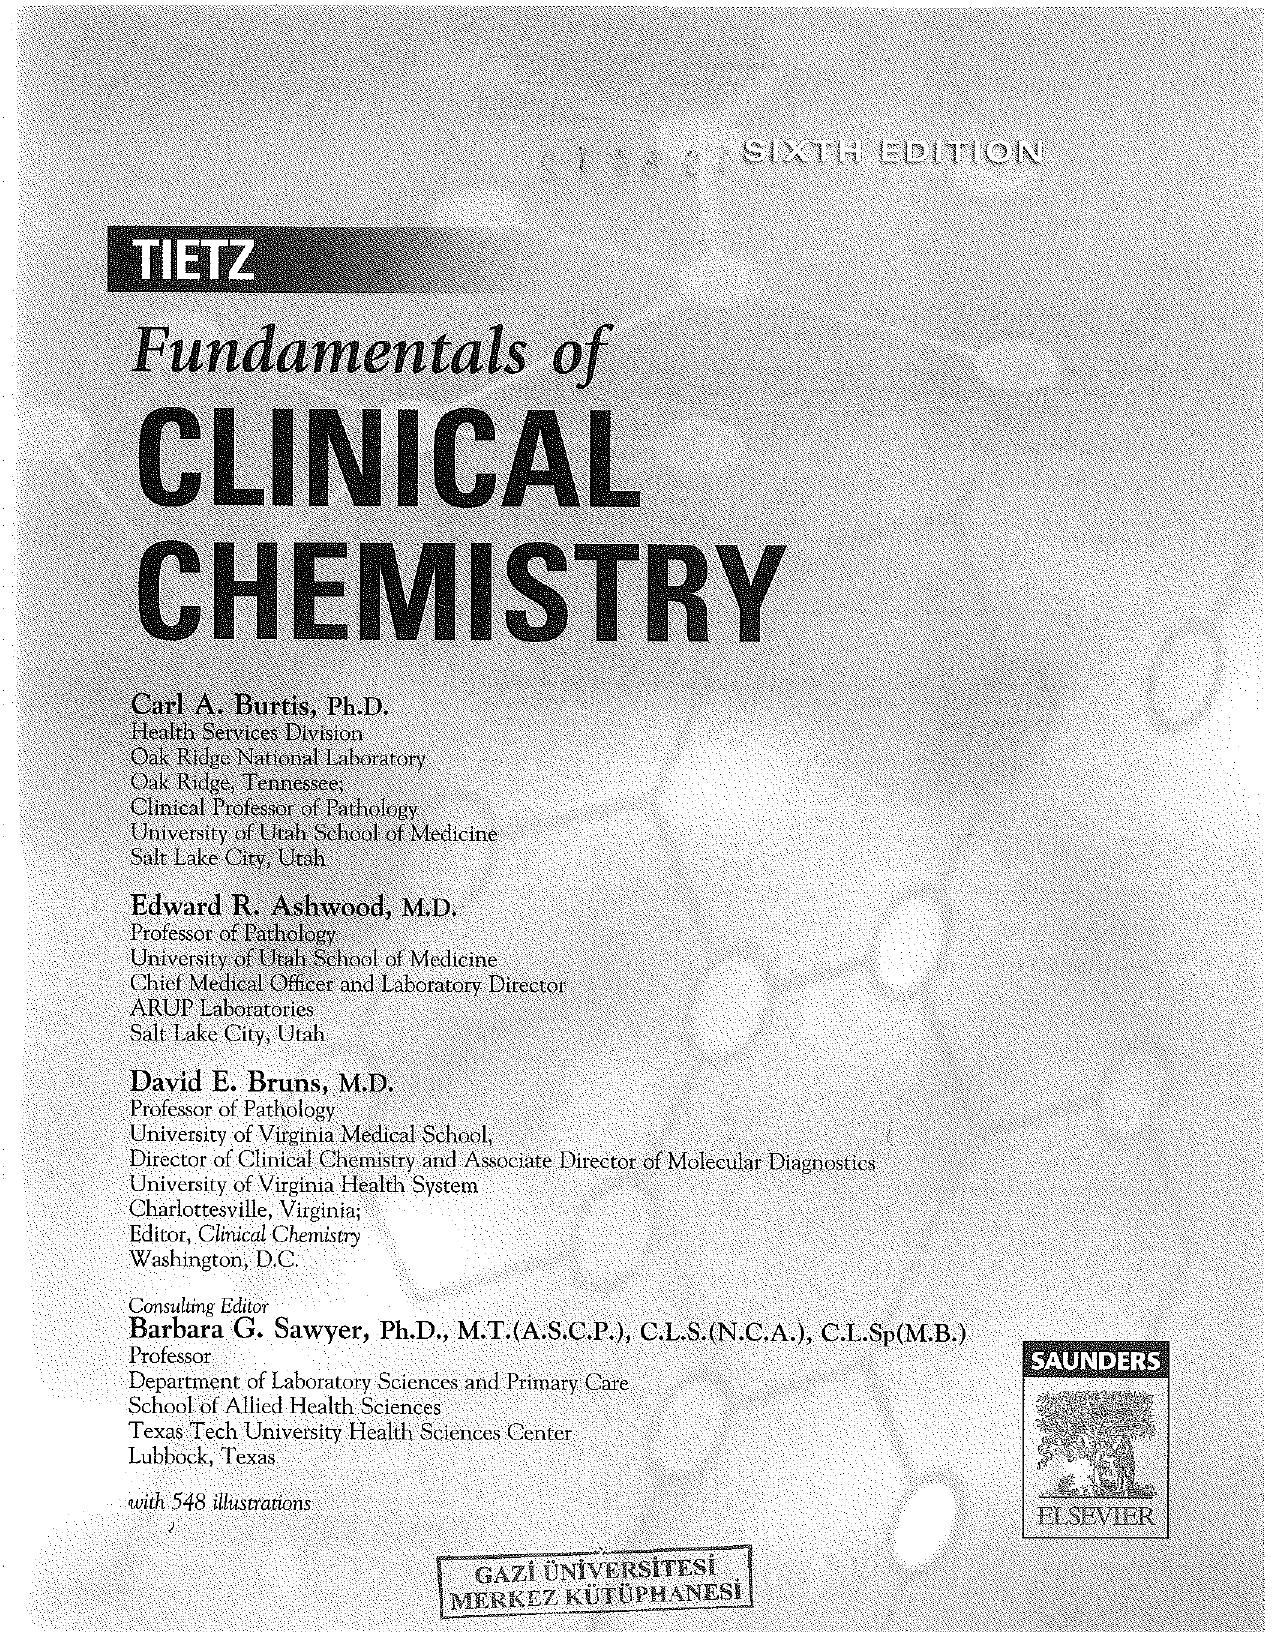 FUNDAMENTAL OF CLINICAL CHEMISTRY